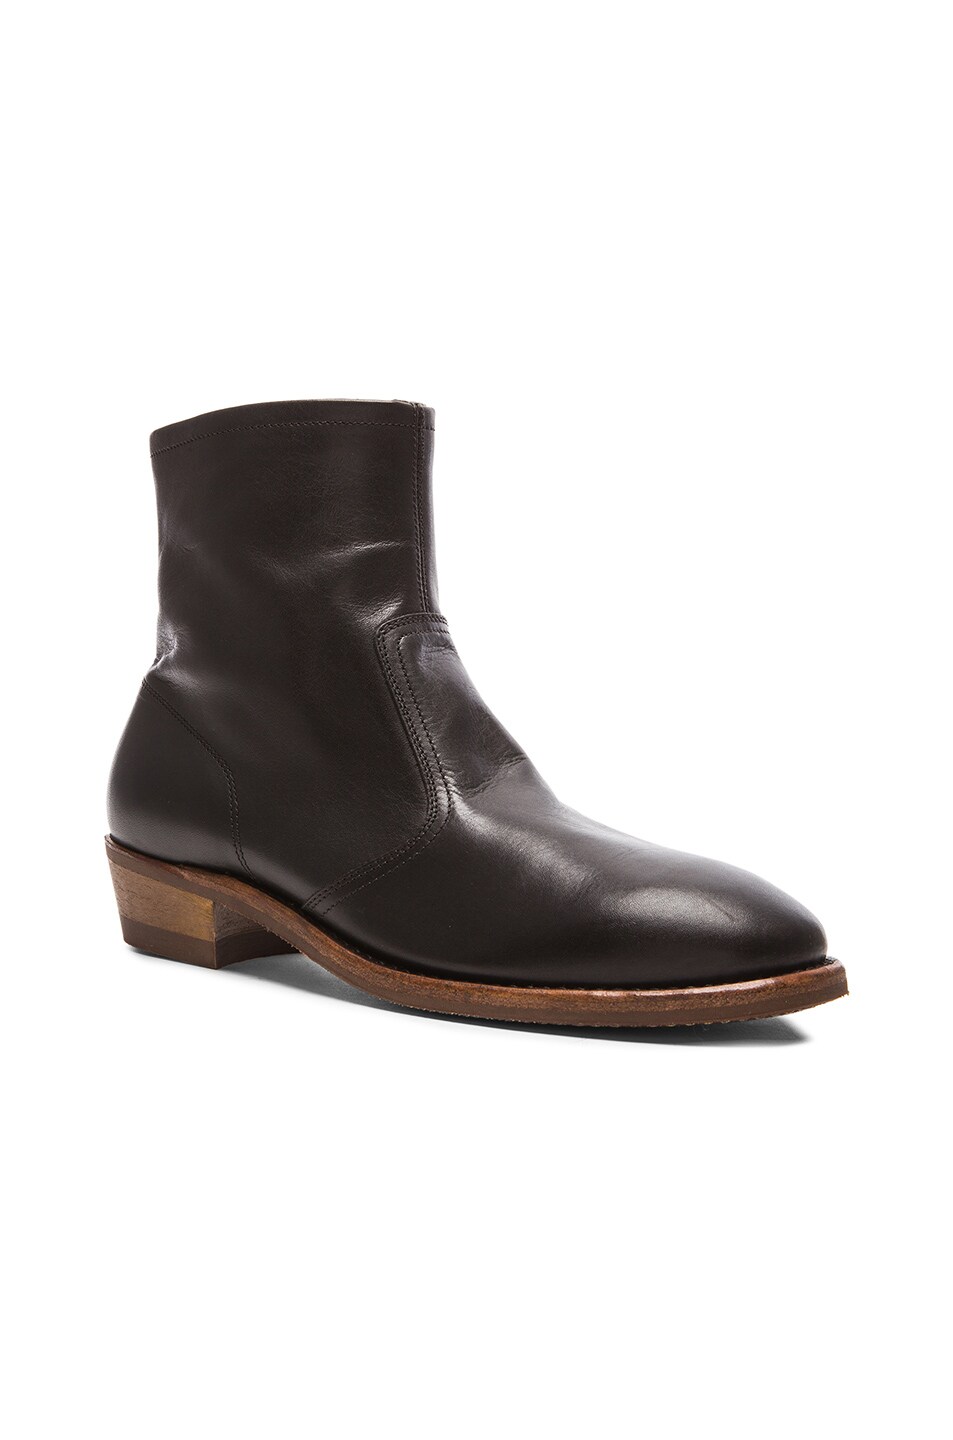 Image 1 of Maison Margiela Replica Leather Boots in Black